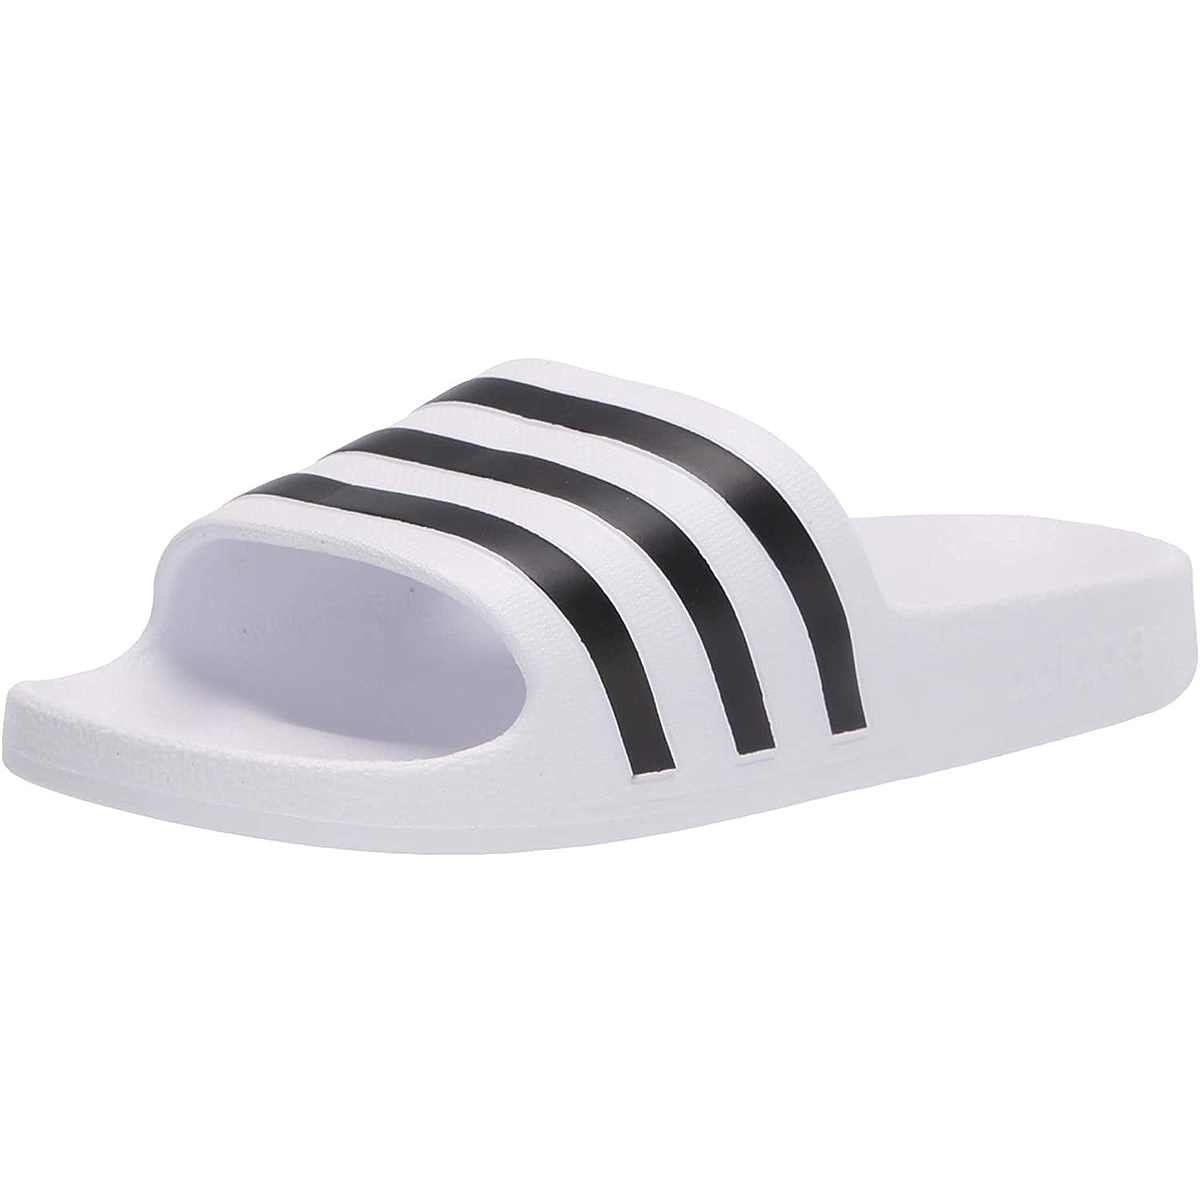 Authentic Quality Yeezy Slide Plain Off-White Couple Slides with